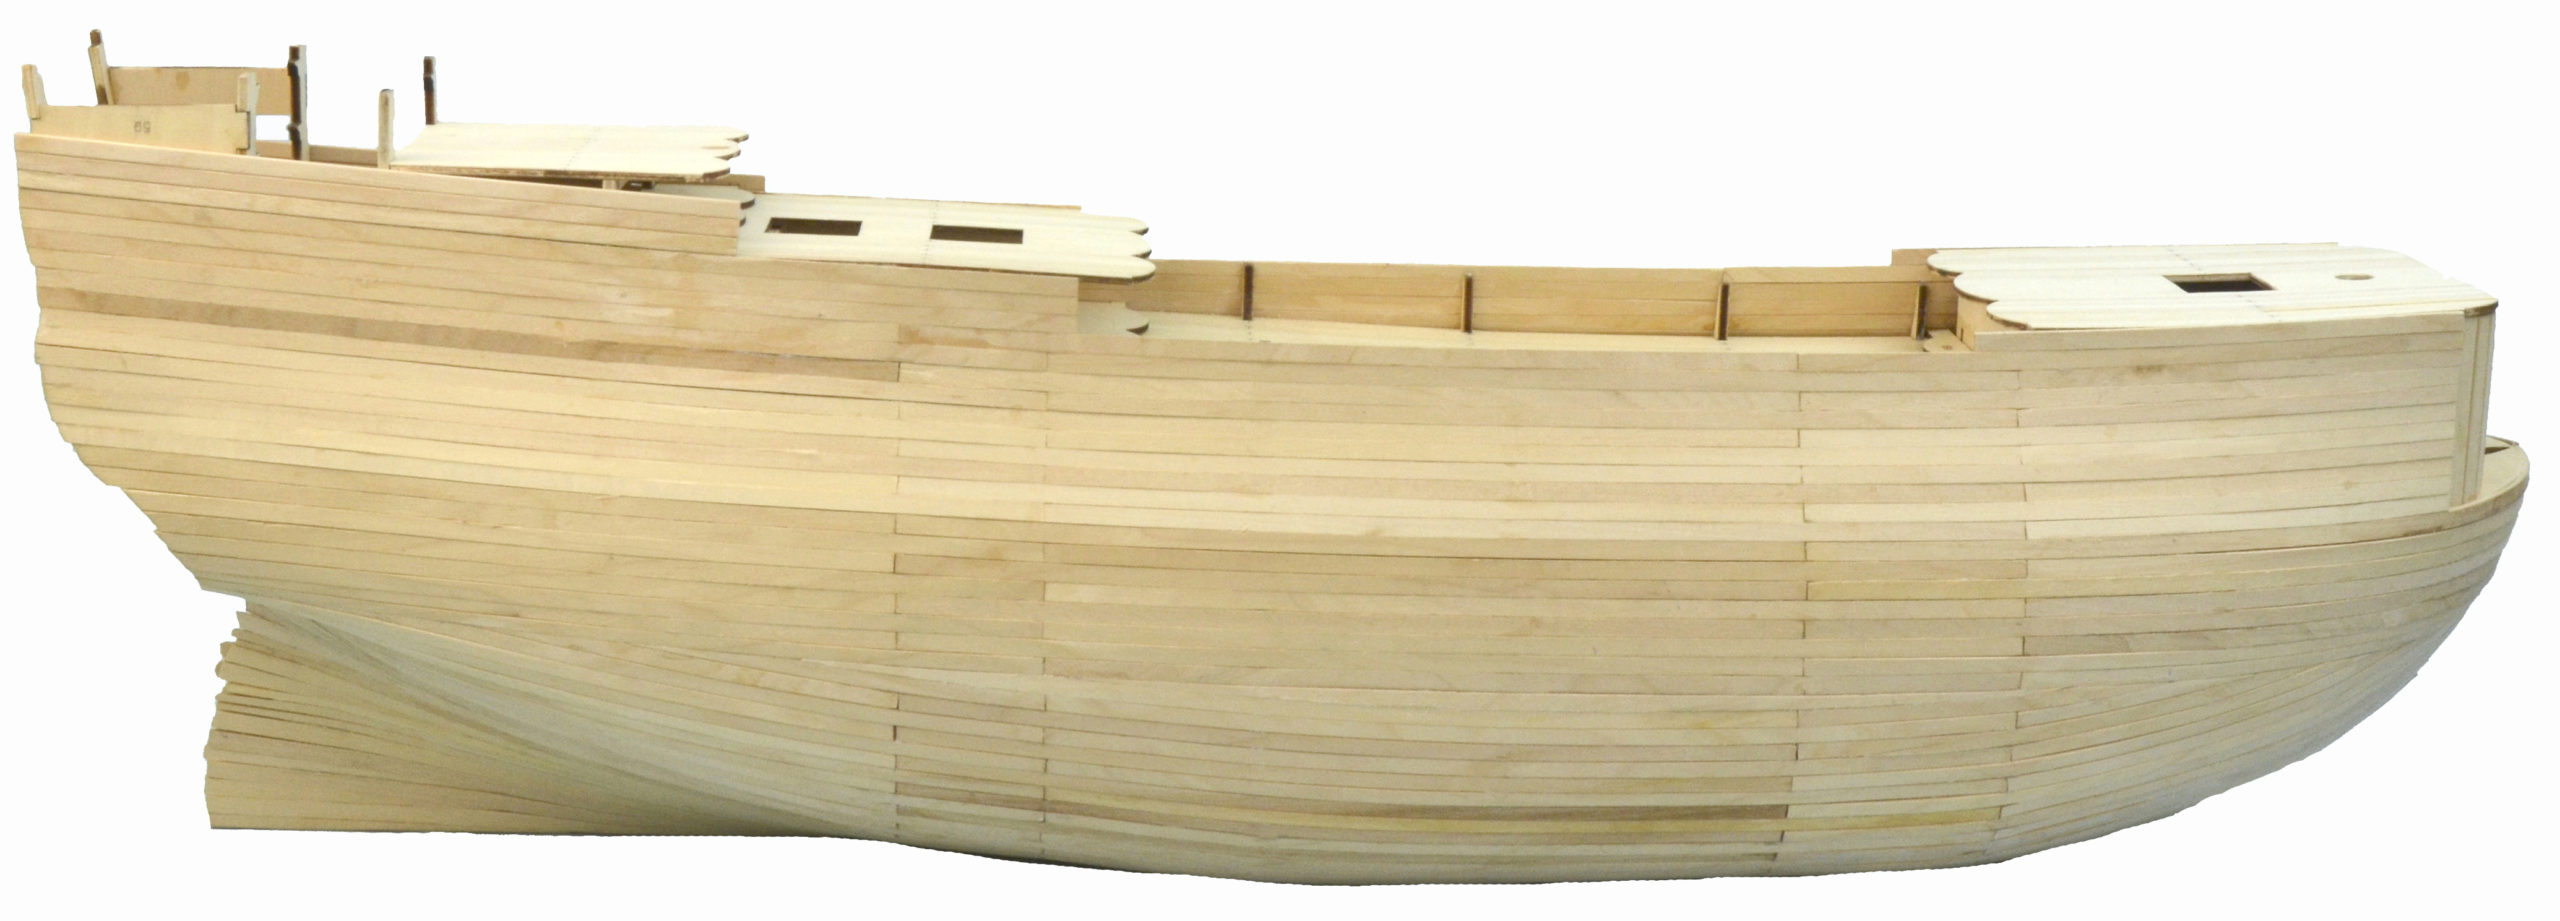 Electric Plank Bender for Ship Modeling, made by Artesania Latina (27074-1).